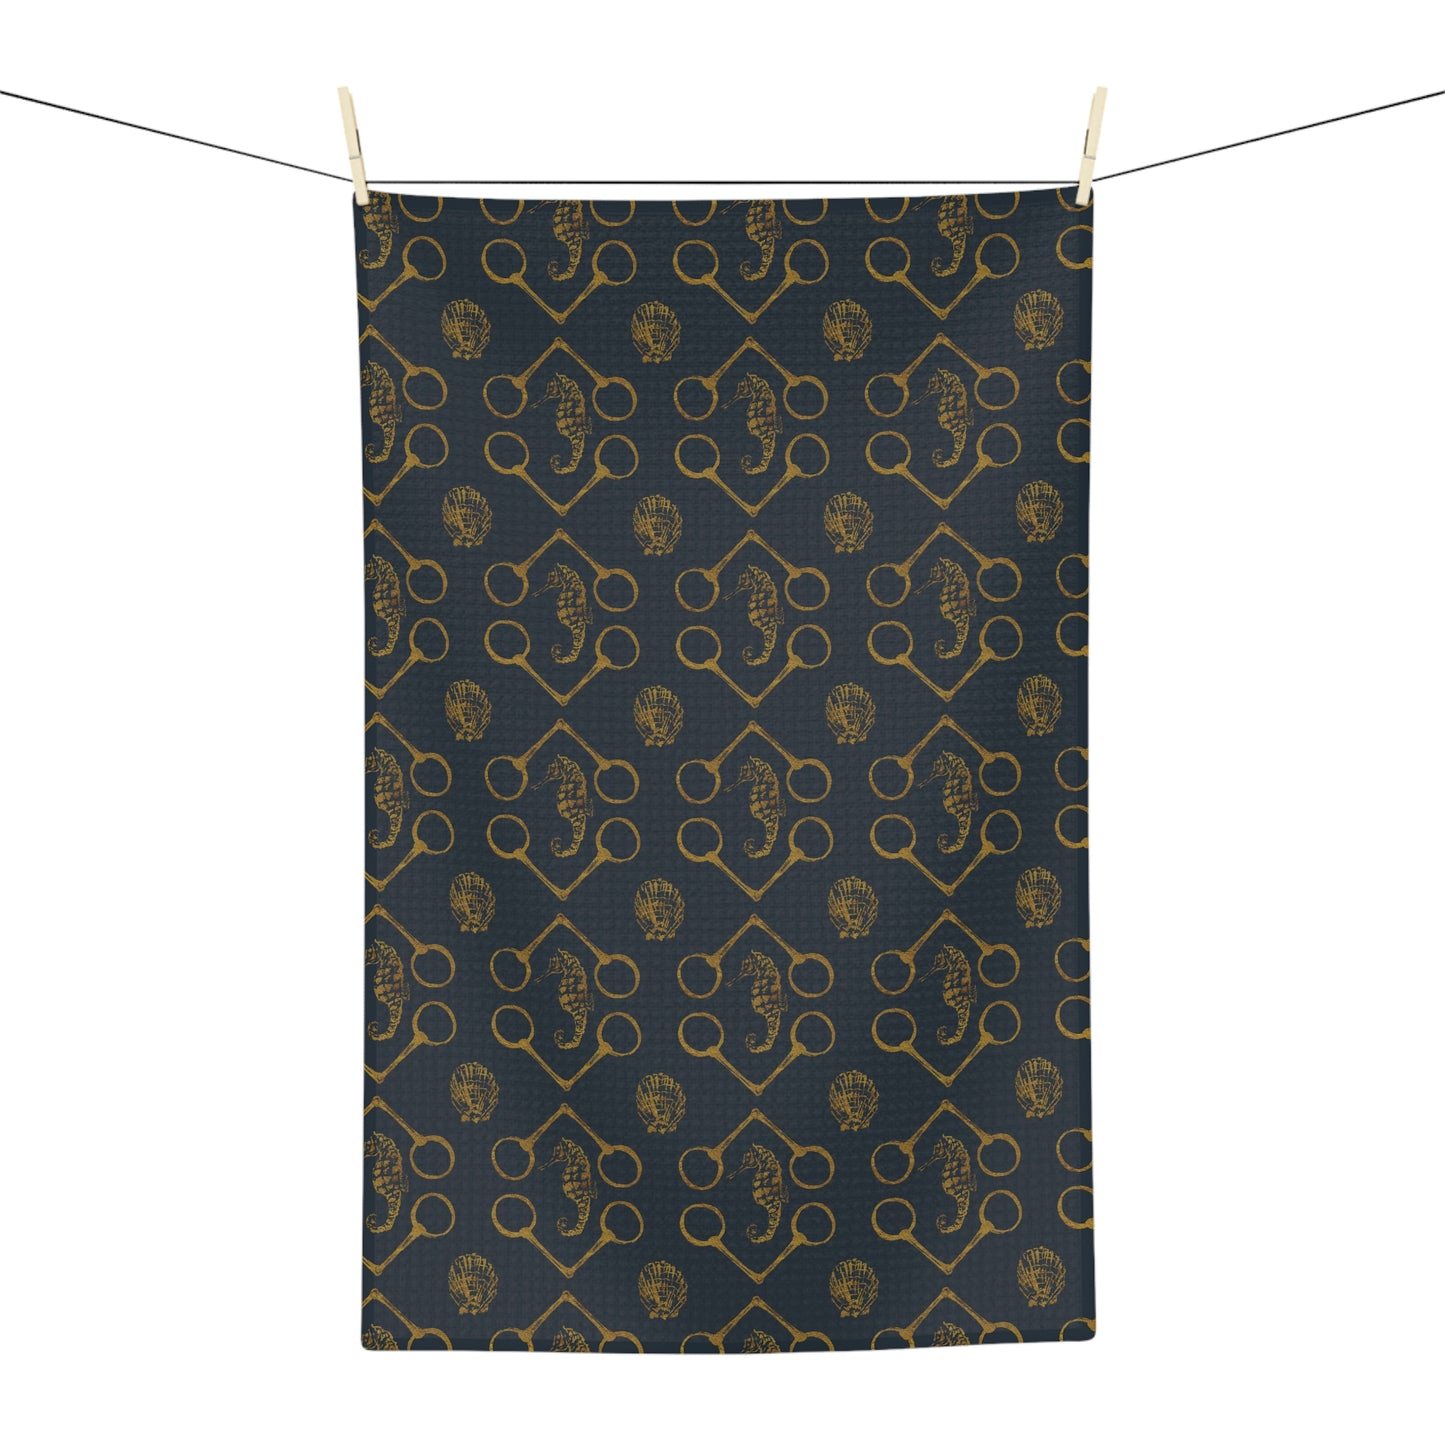 Sea horse and bit Soft Tea Towel - Navy and gold